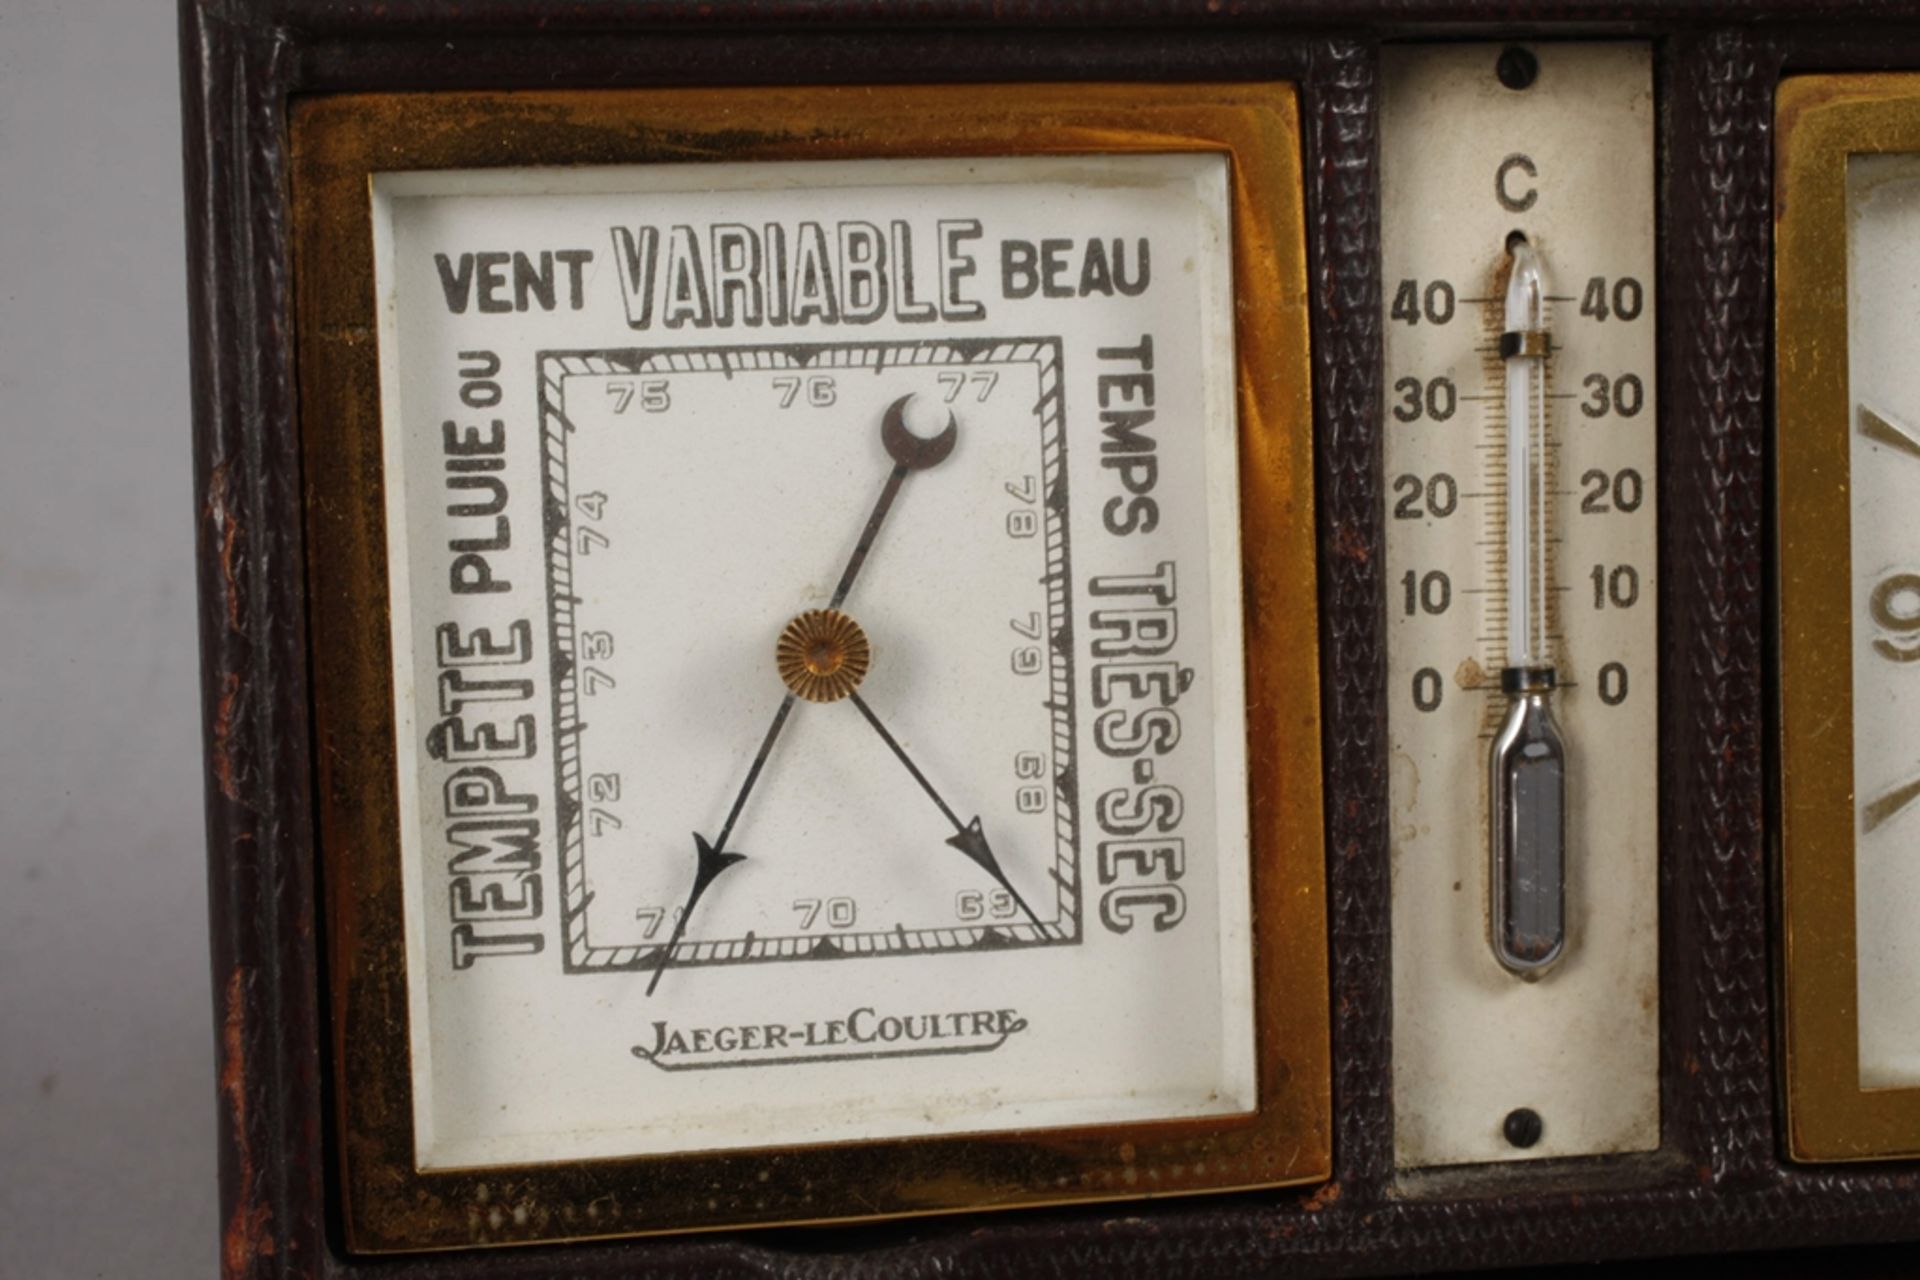 Jaeger LeCoultre Weather Station Compendium - Image 2 of 5